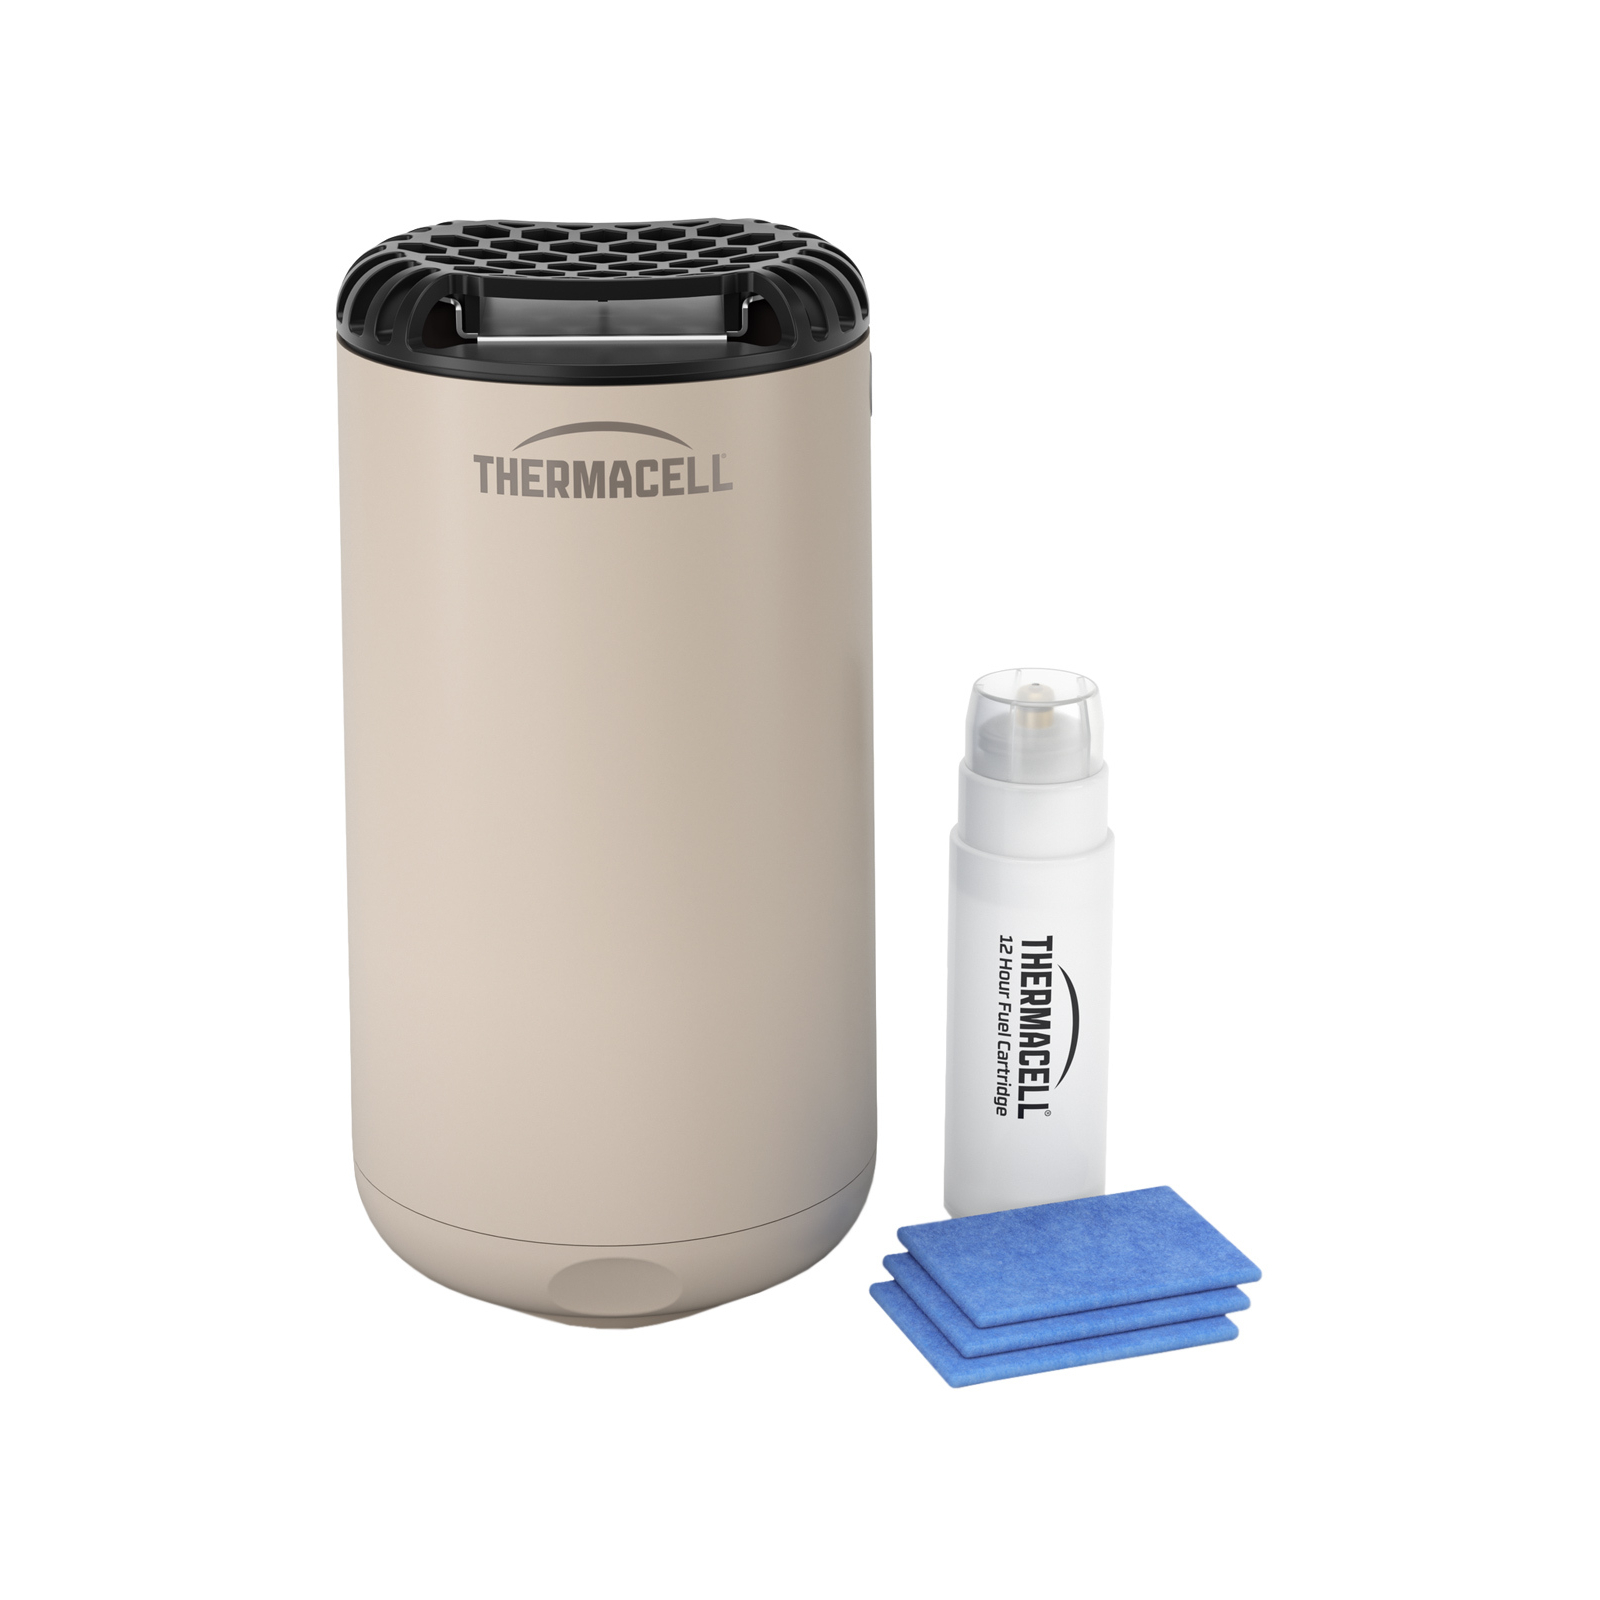 Фумігатор Тhermacell Patio Shield Mosquito Repeller MR-PS Linen (1200.05.92) зображення 3